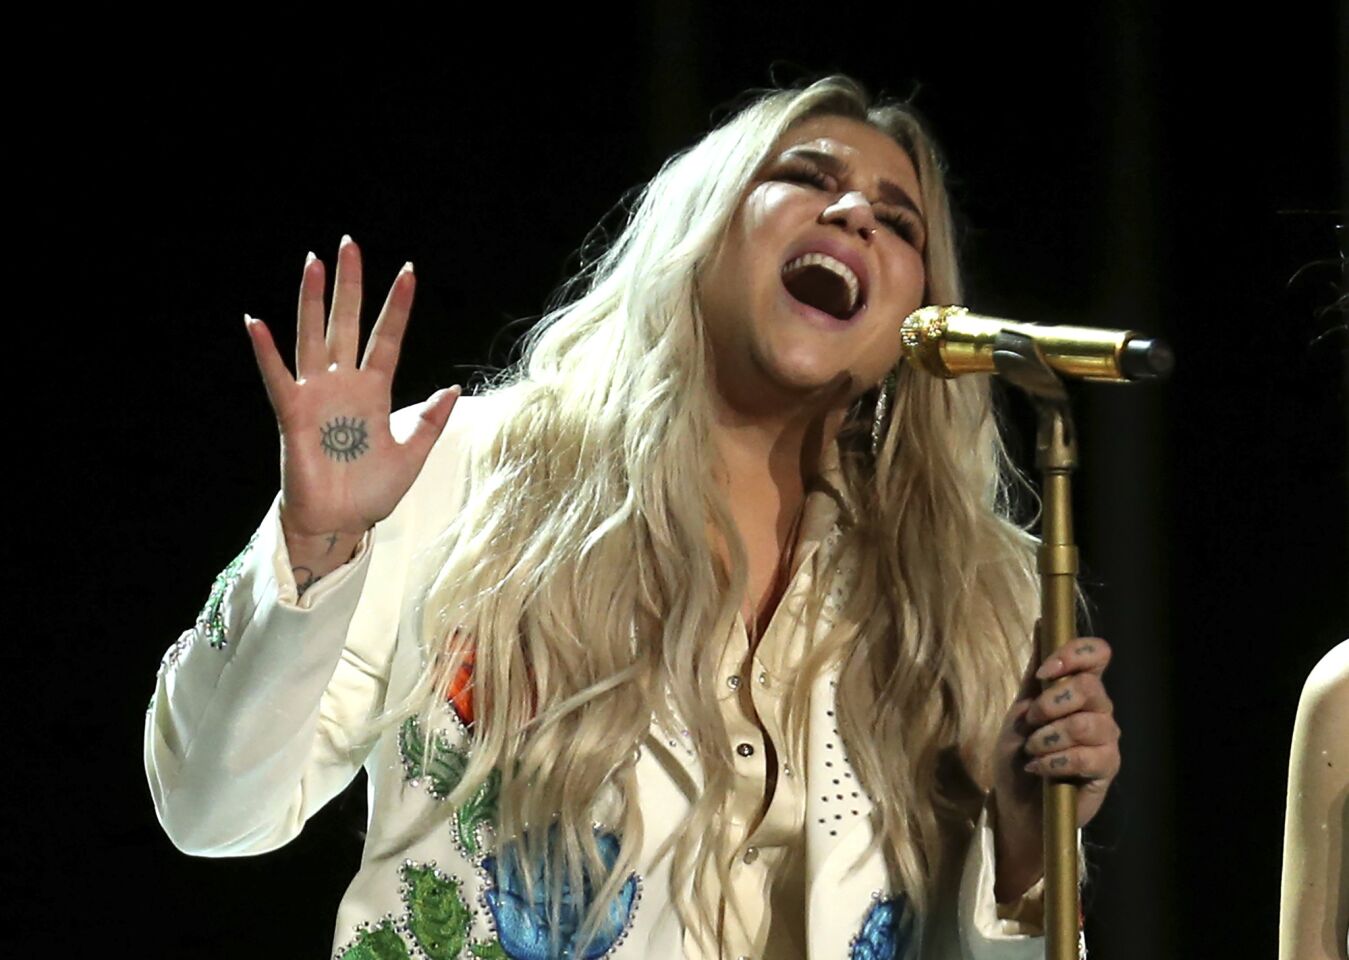 Kesha performs at the 60th Grammy Awards at Madison Square Garden in New York on Sunday.